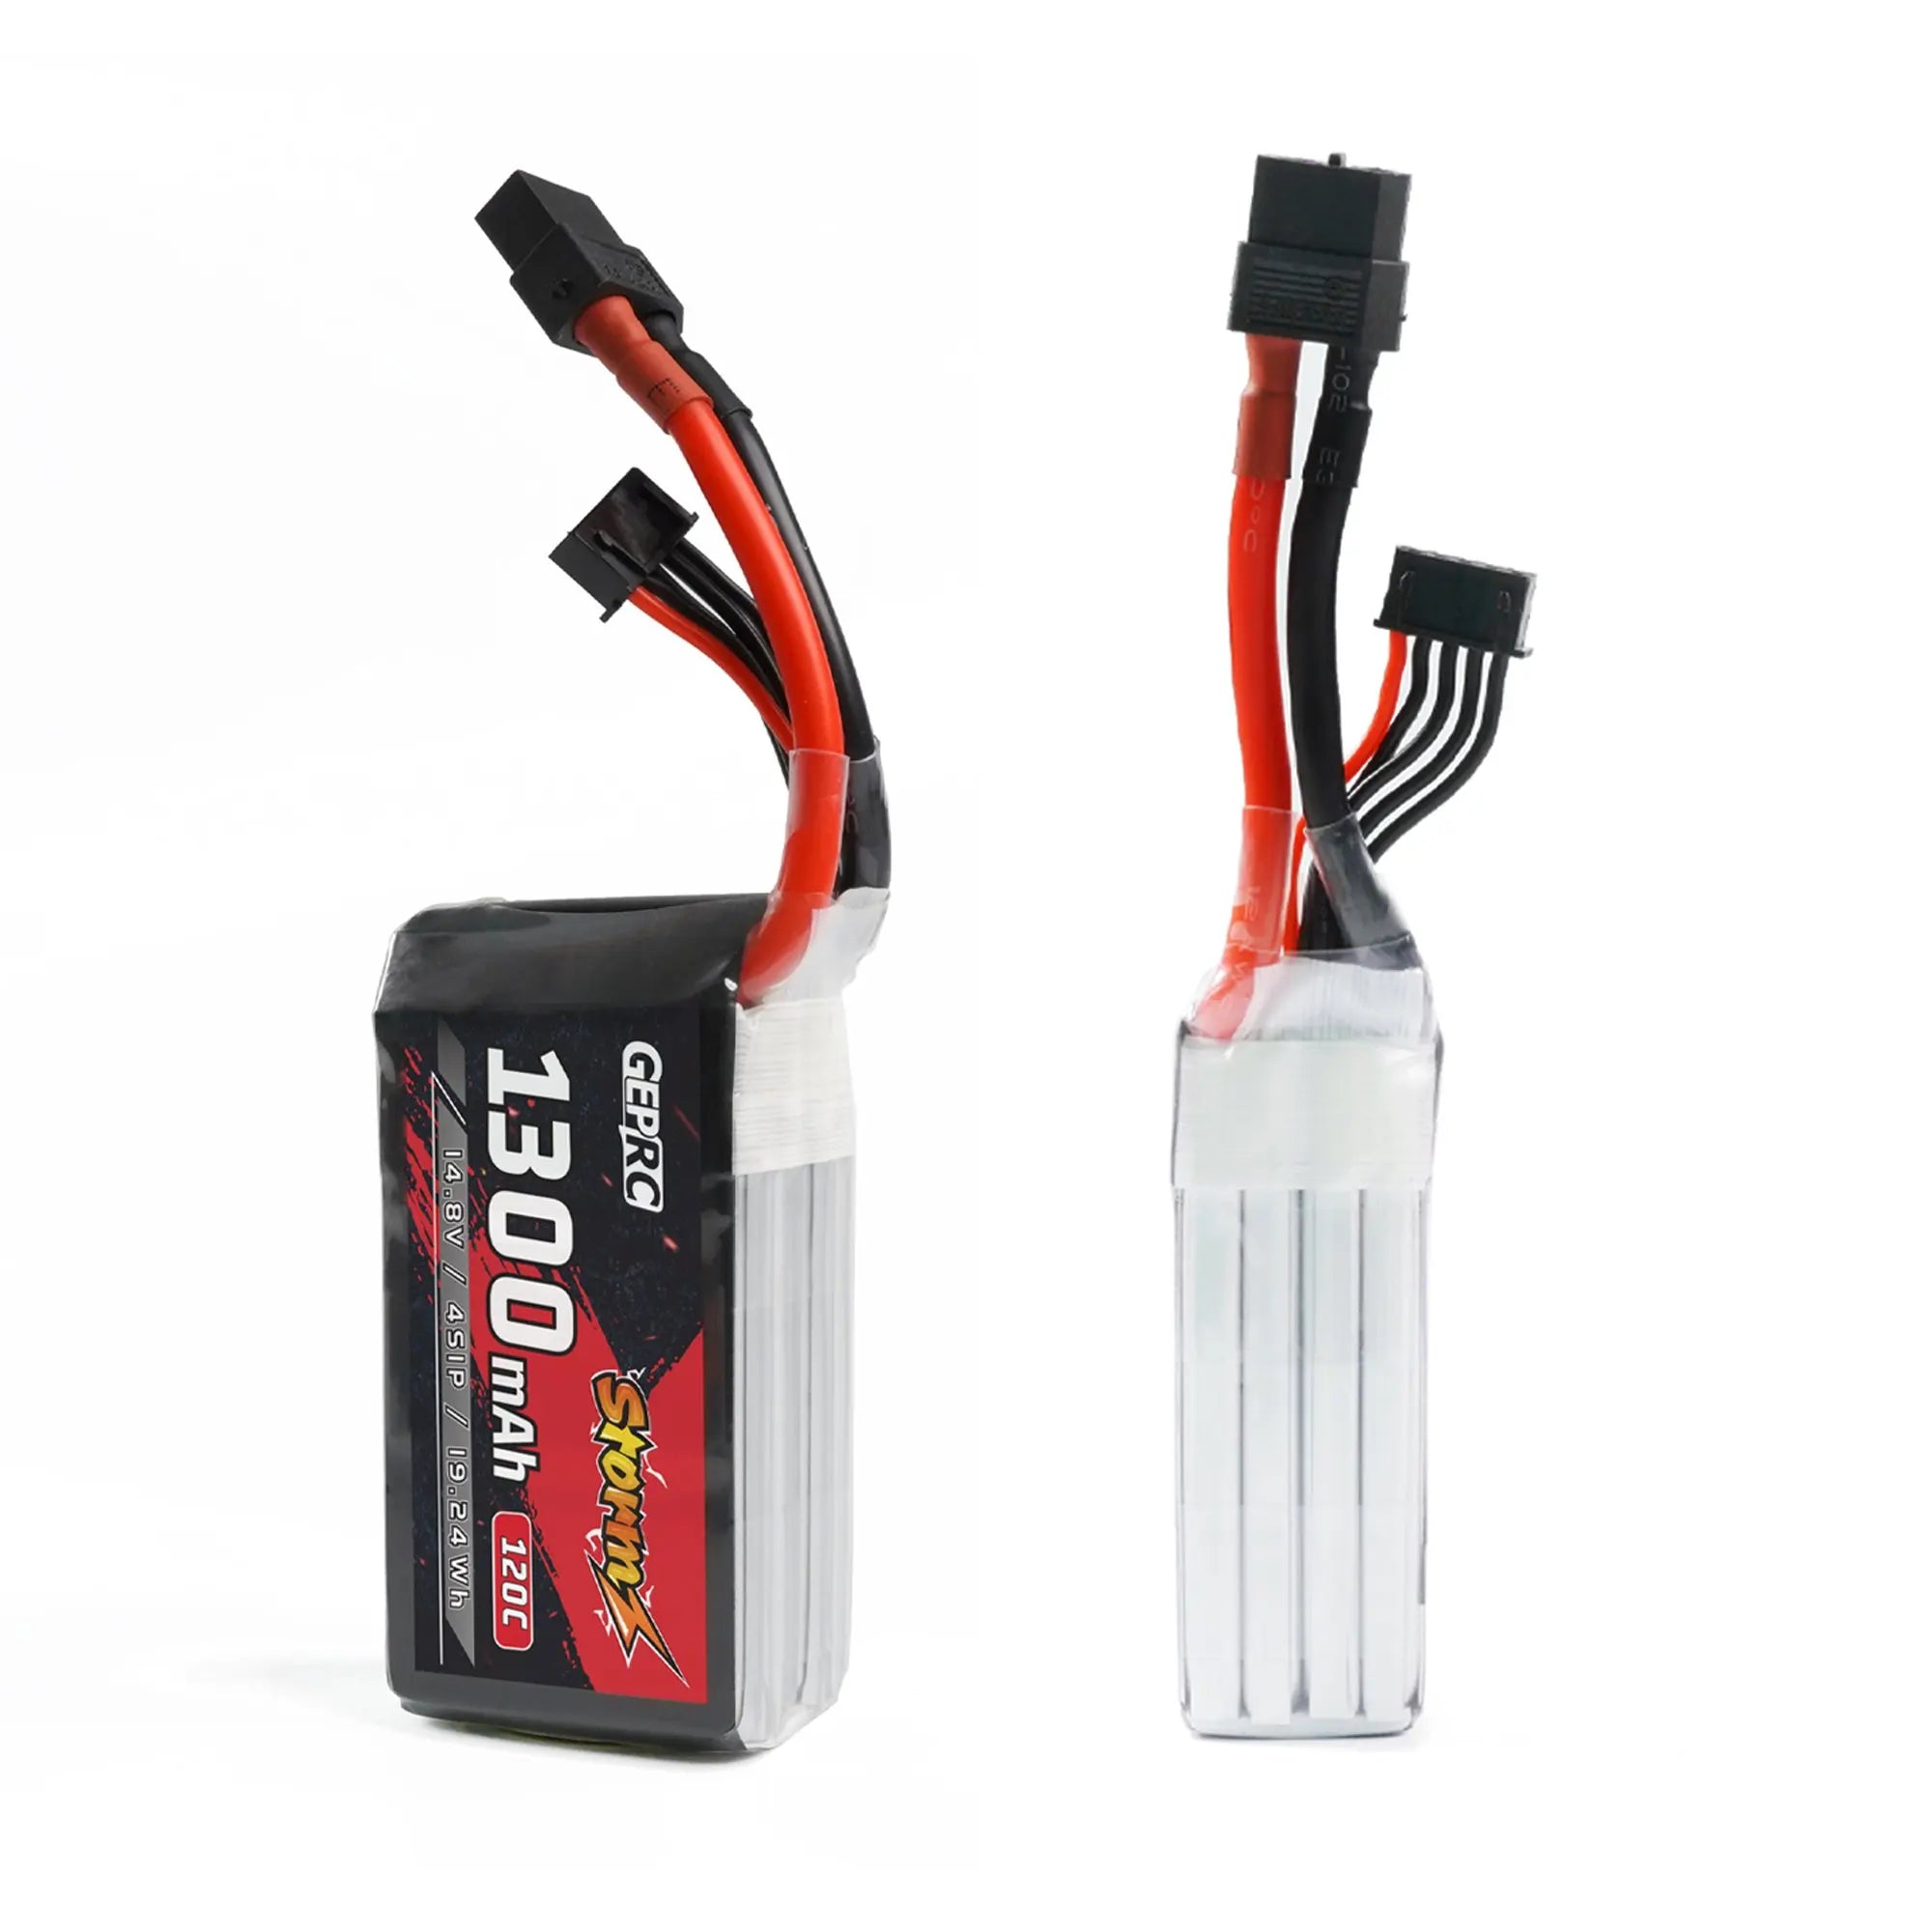 GEPRC Storm 4S 1300mAh 120C Lipo Battery, ruptured battery should be disposed of in time . battery voltage should be 80V-3